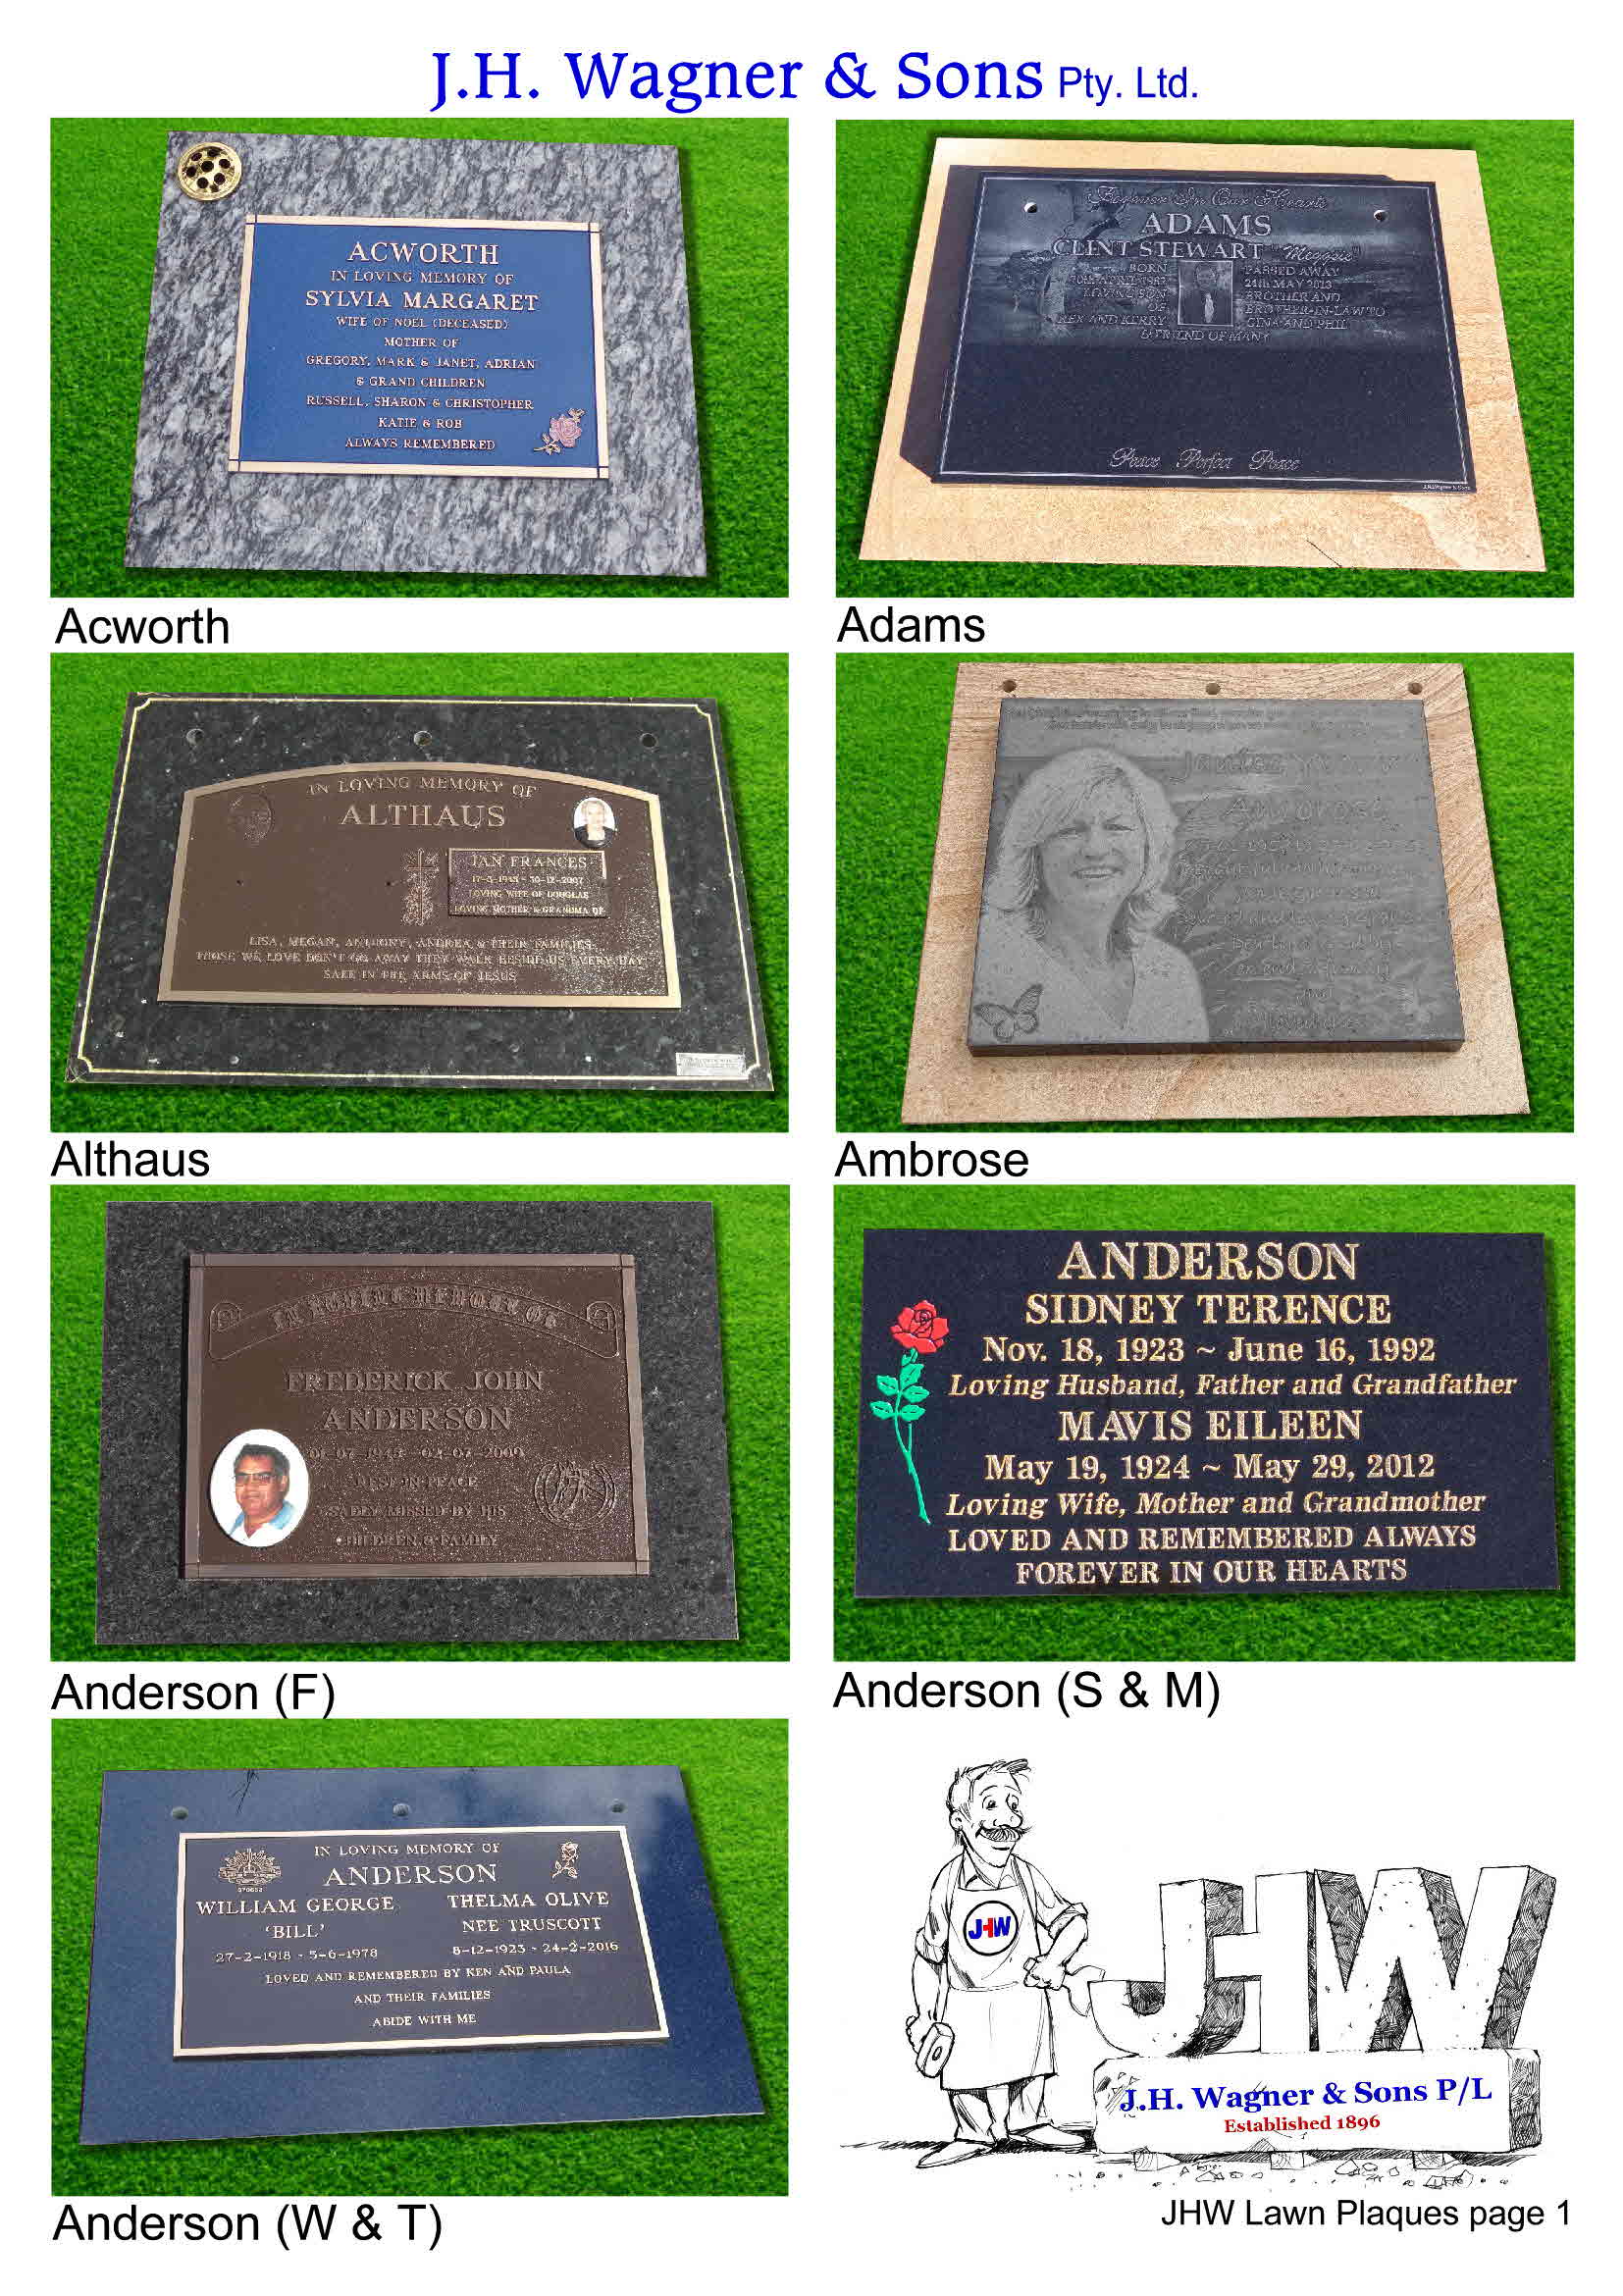 Lawn Plaques from J.H. Wagner & Sons Page 1